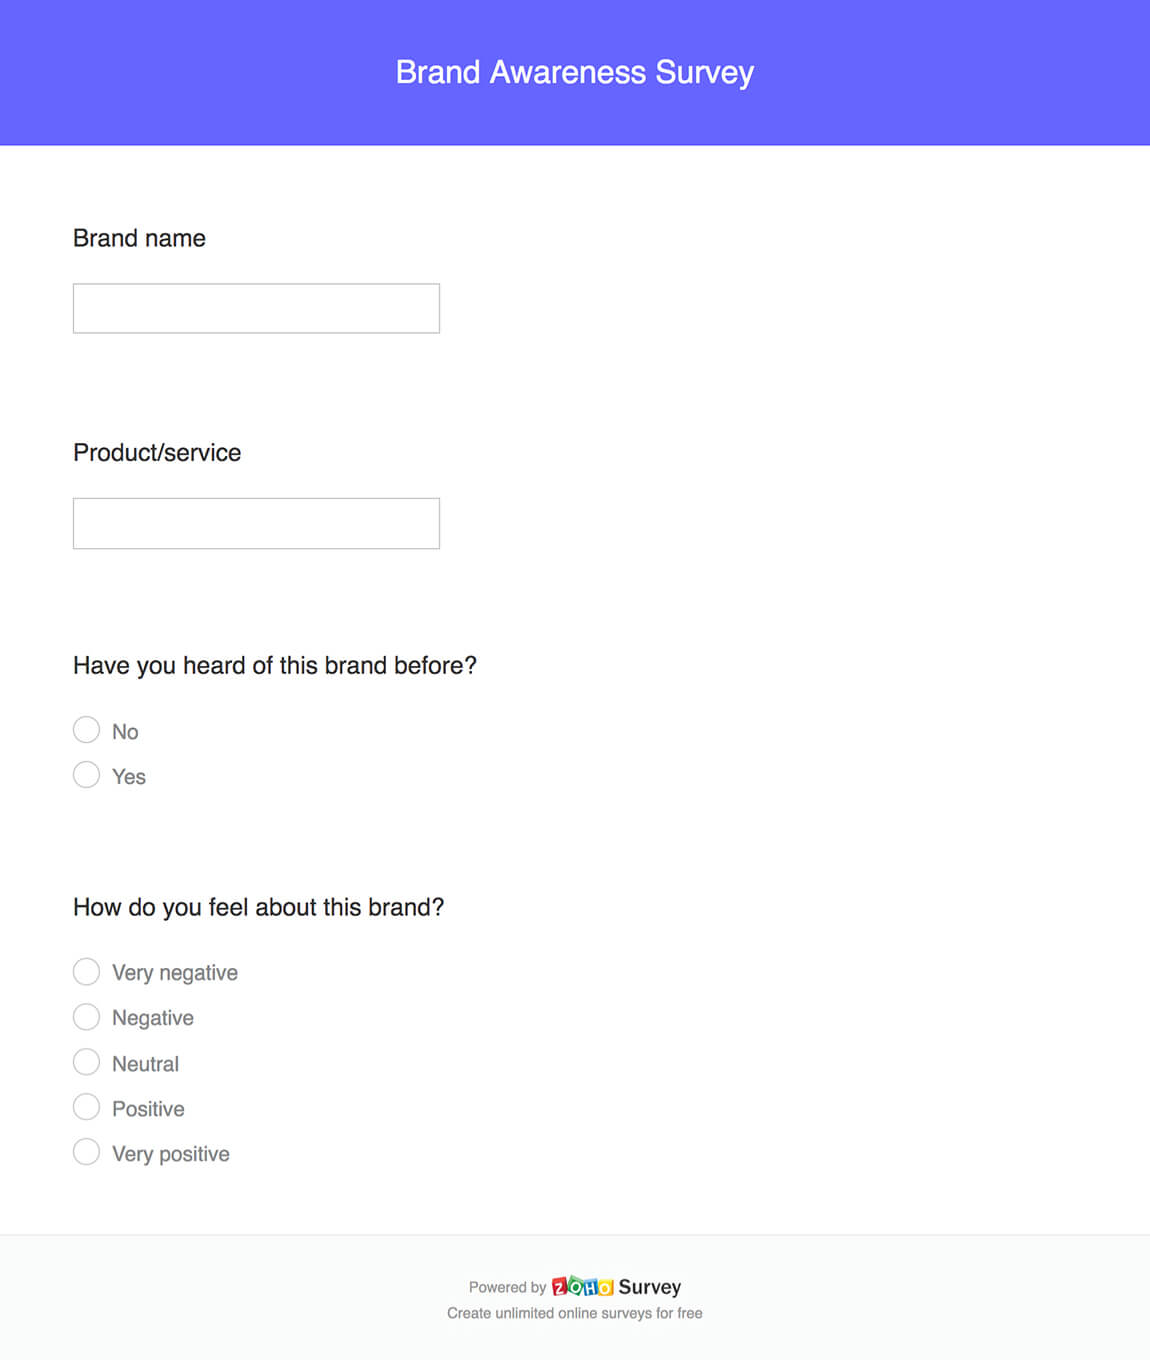 Brand Awareness Survey Readymade Questions and Template